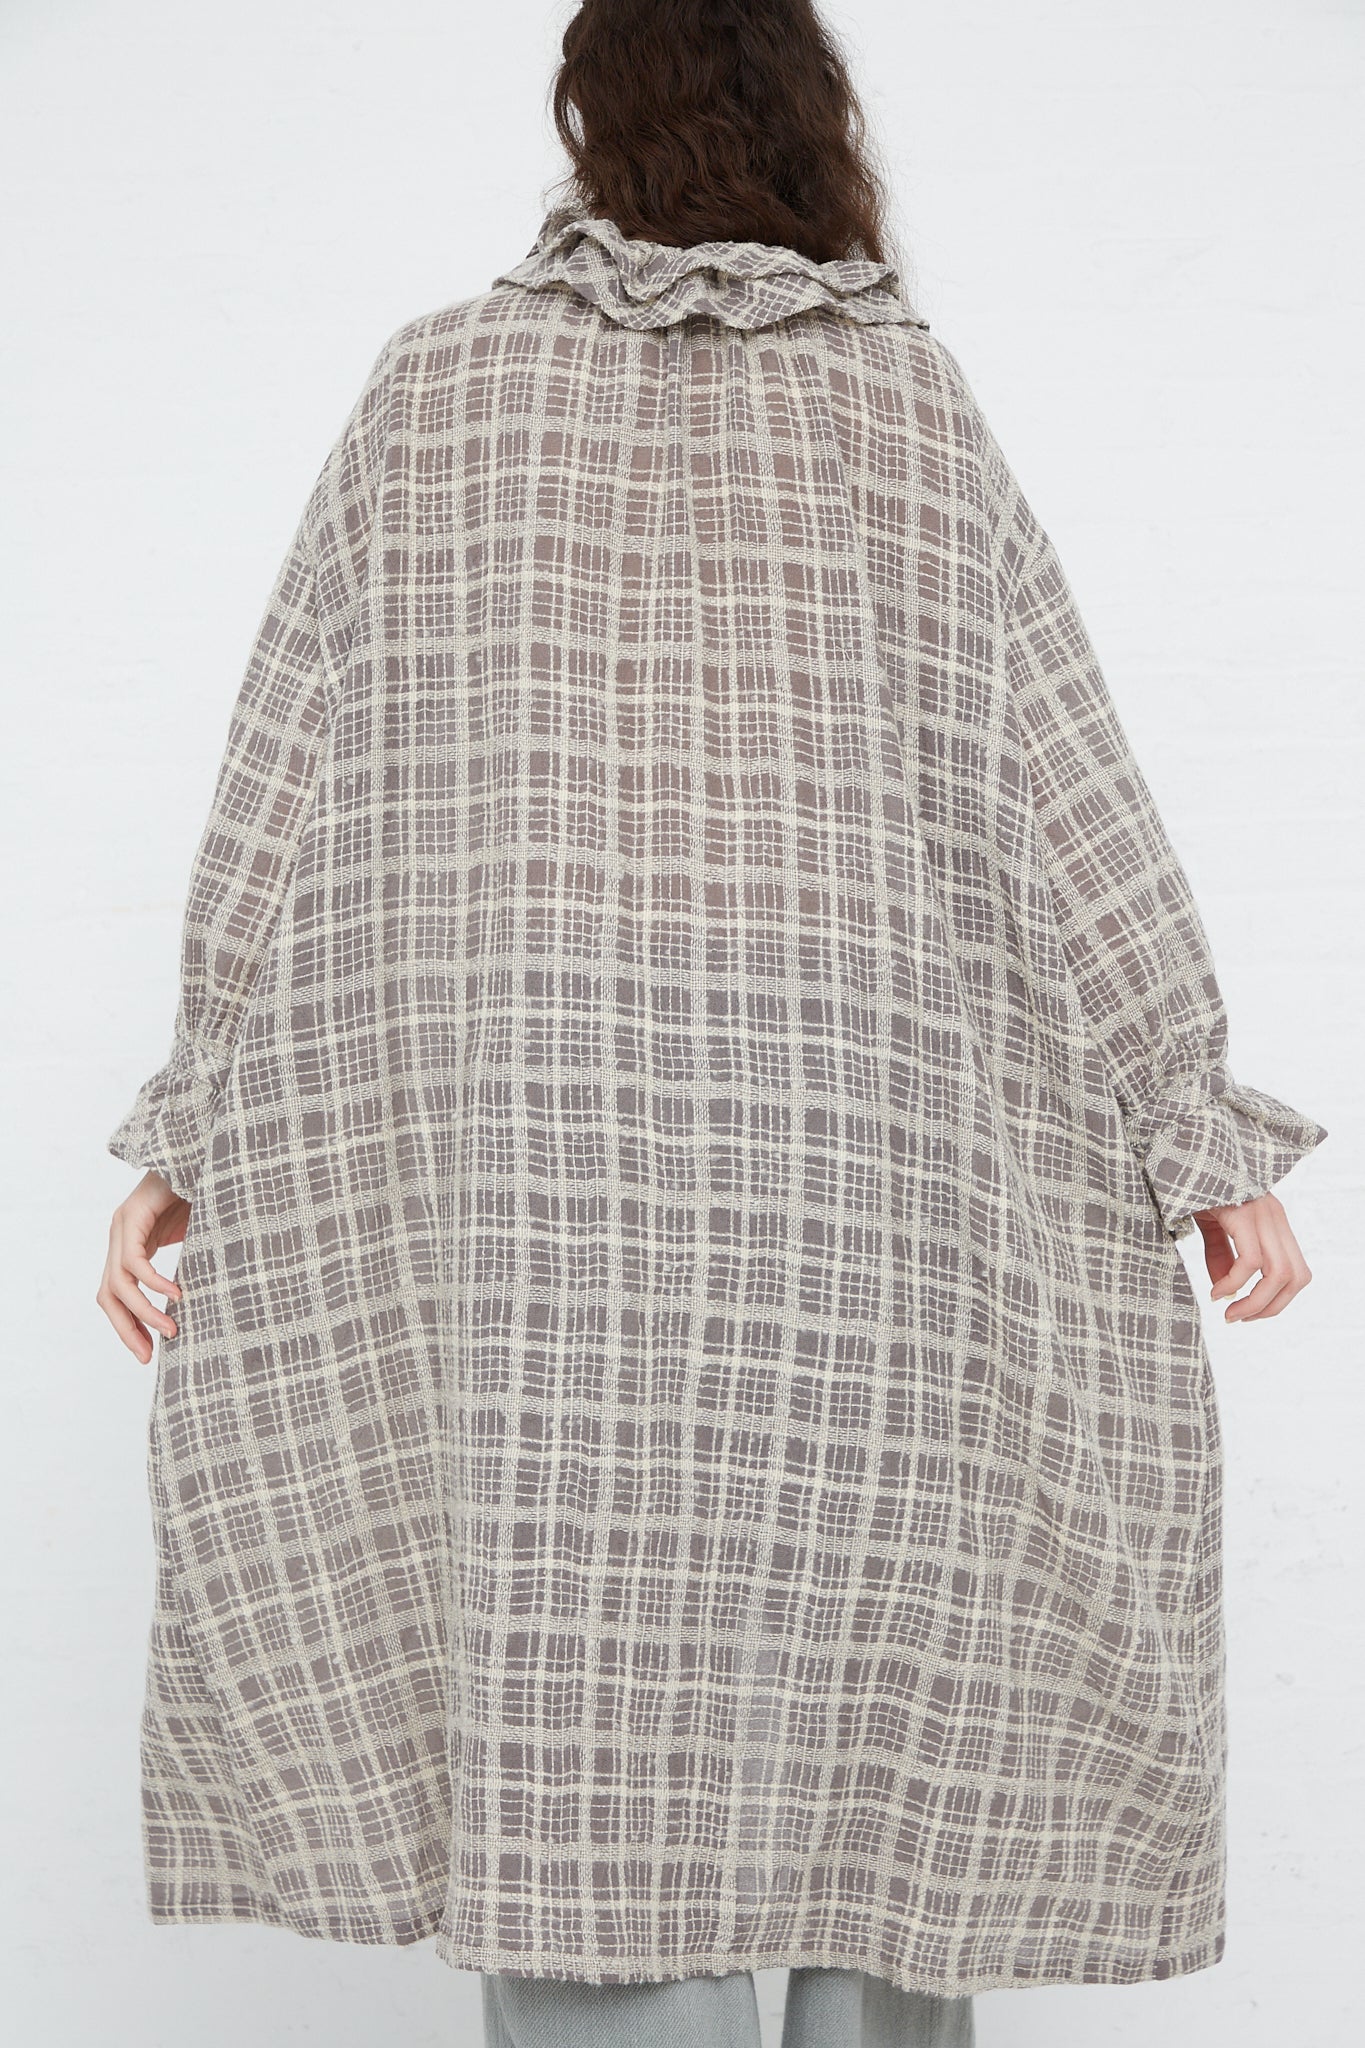 The woman, dressed in a Wool Check Frill Dress in Mocha by Ichi Antiquités, is seen from behind.